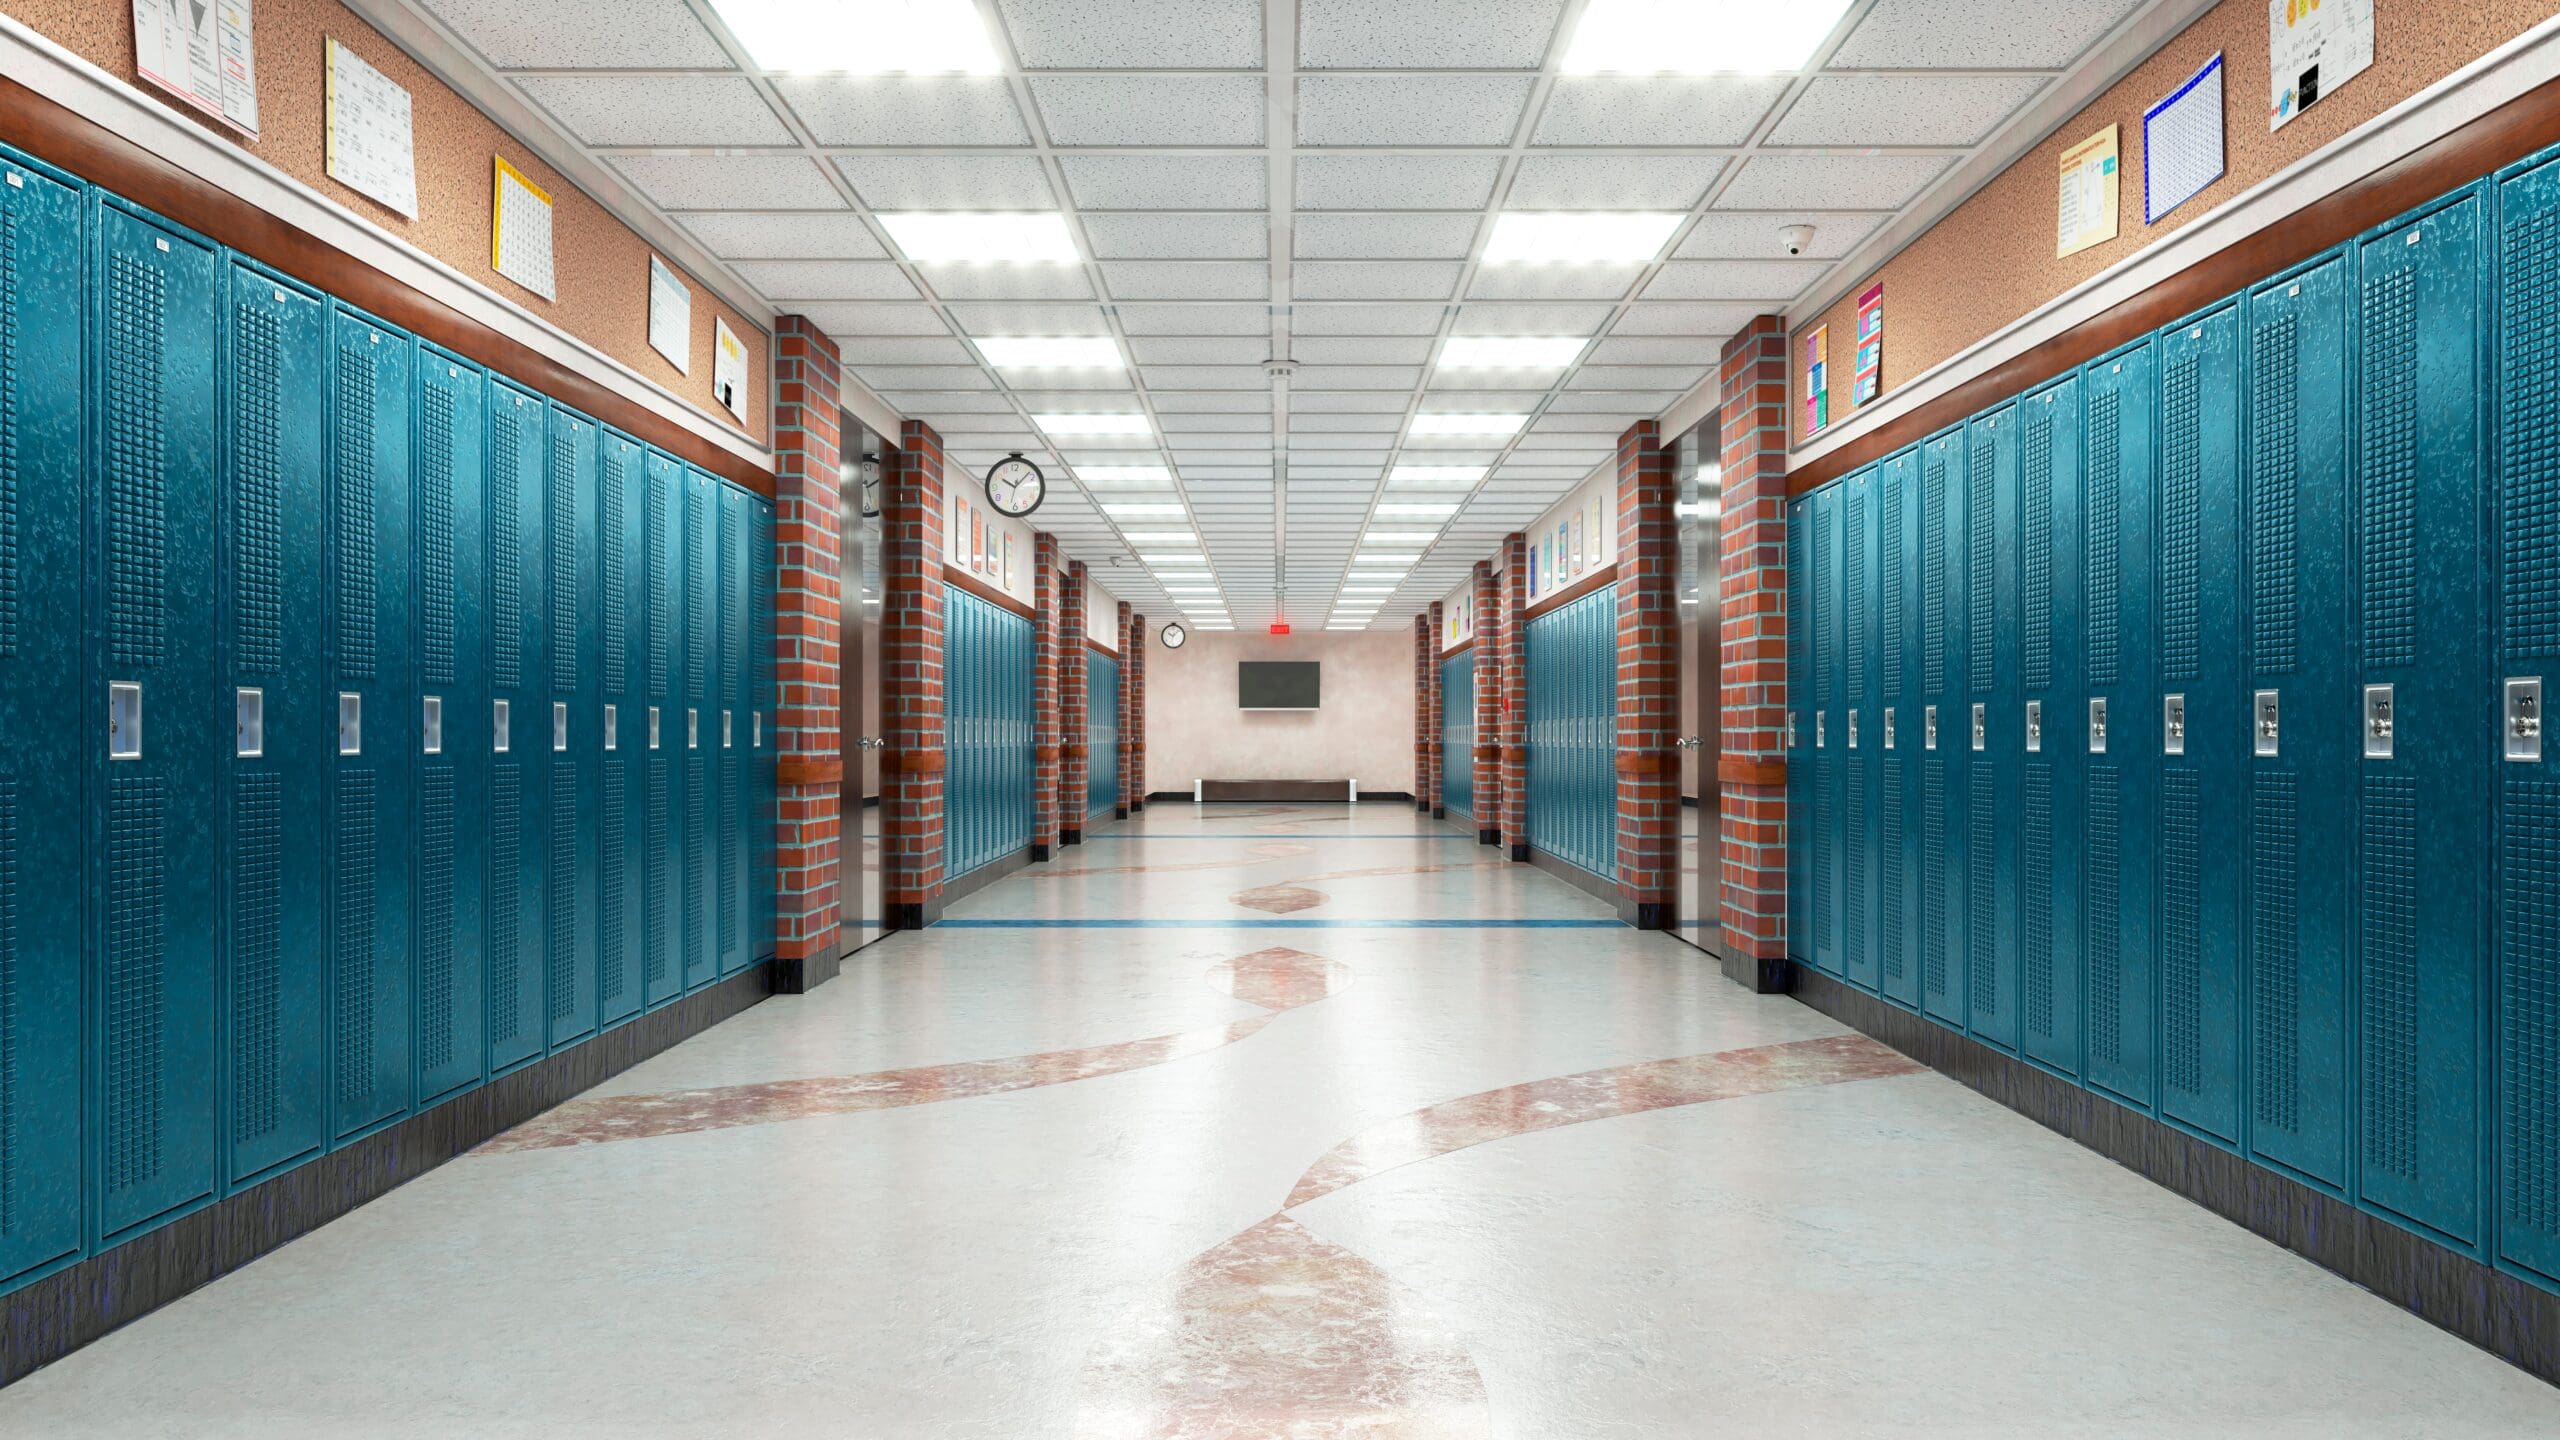 Overcome the #1 Radio Communication Barrier to Safer Schools